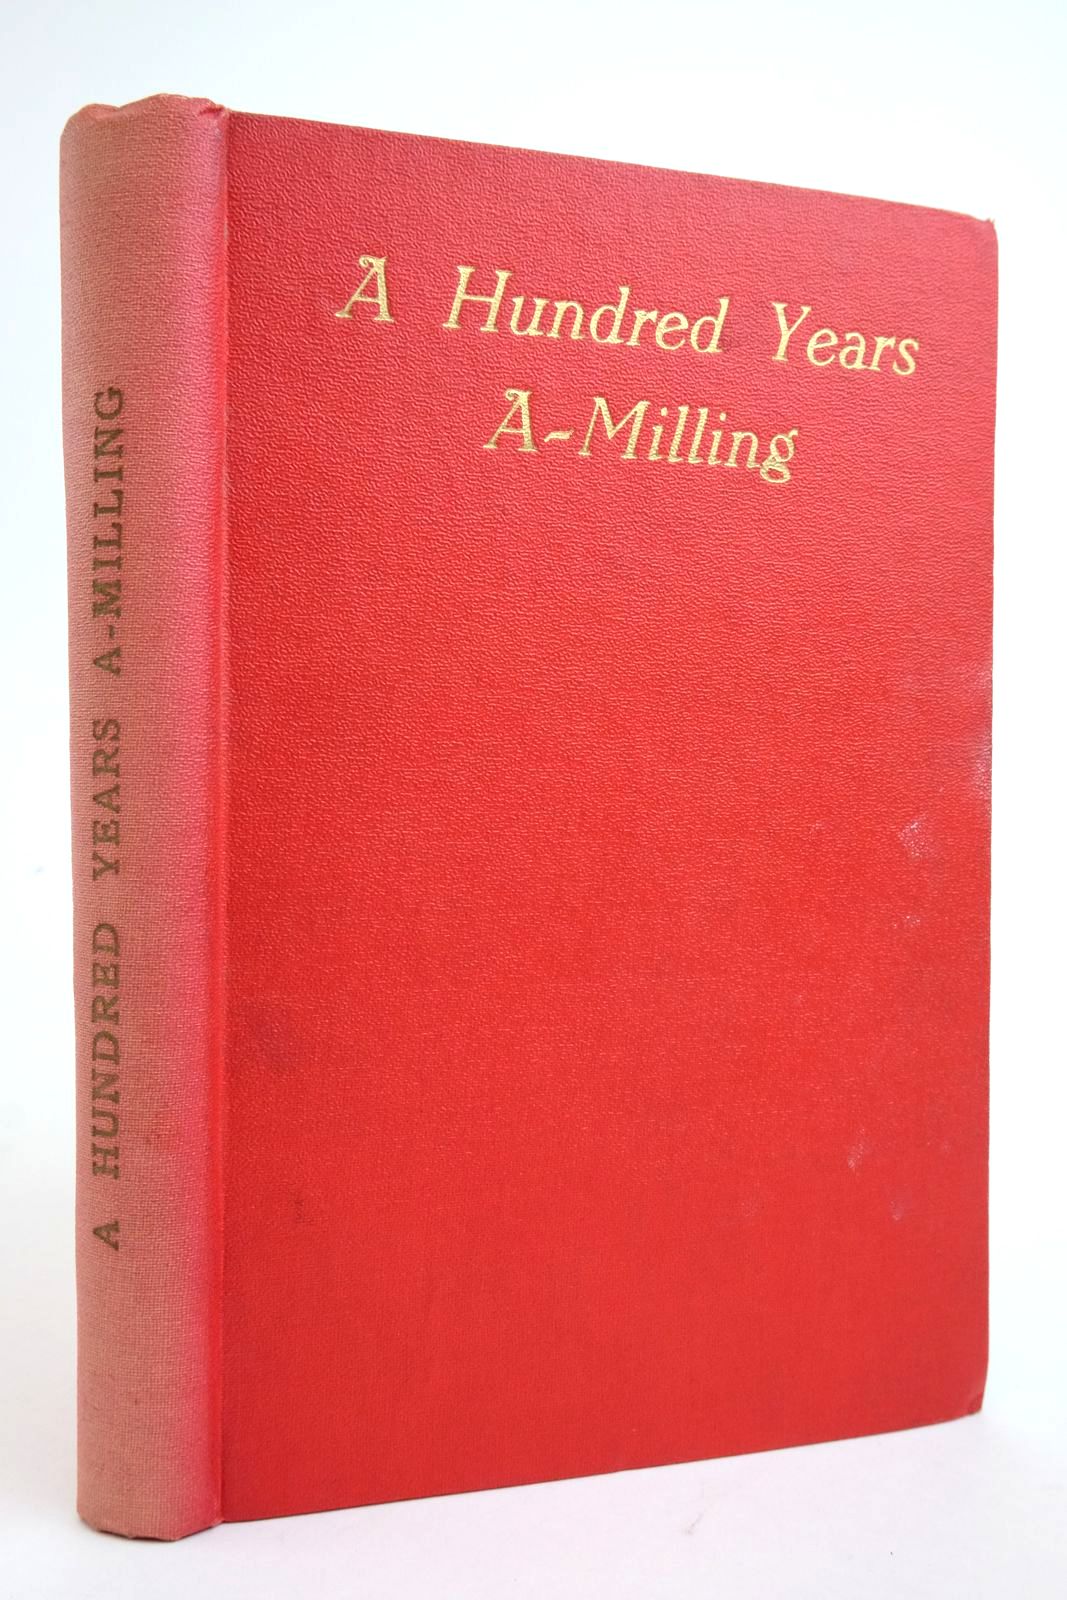 Photo of A HUNDRED YEARS A-MILLING: COMMEMORATING AN ULSTER MILL CENTENARY written by Scott, William Maddin illustrated by Ellis, Gray Marshall, Margaret Murnaghan, Colette published by W. &amp; C. Scott, Ltd. (STOCK CODE: 2135961)  for sale by Stella & Rose's Books